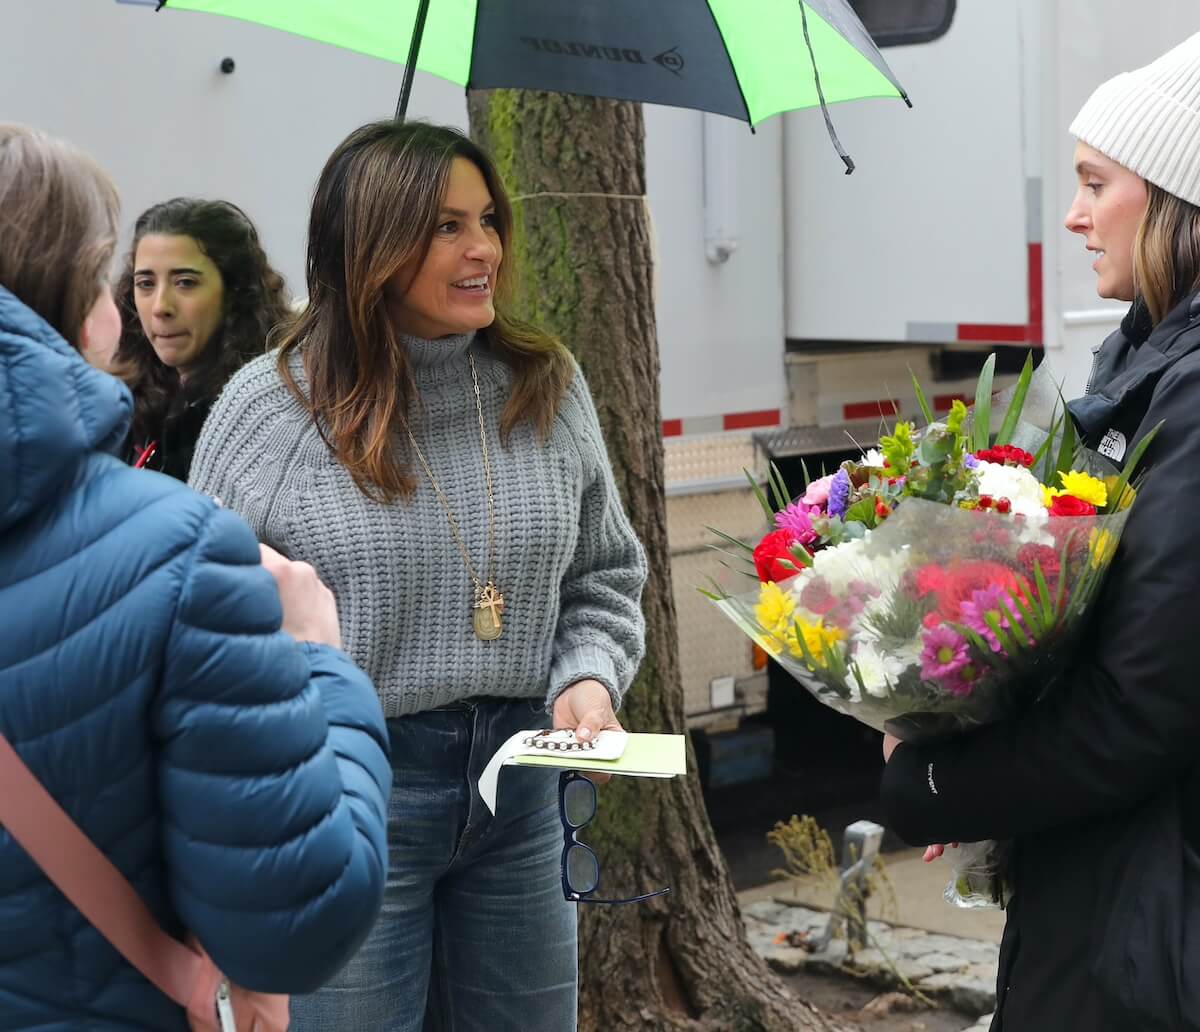 Mariska Hargitay smiles at a woman holding a bouquet of flowers